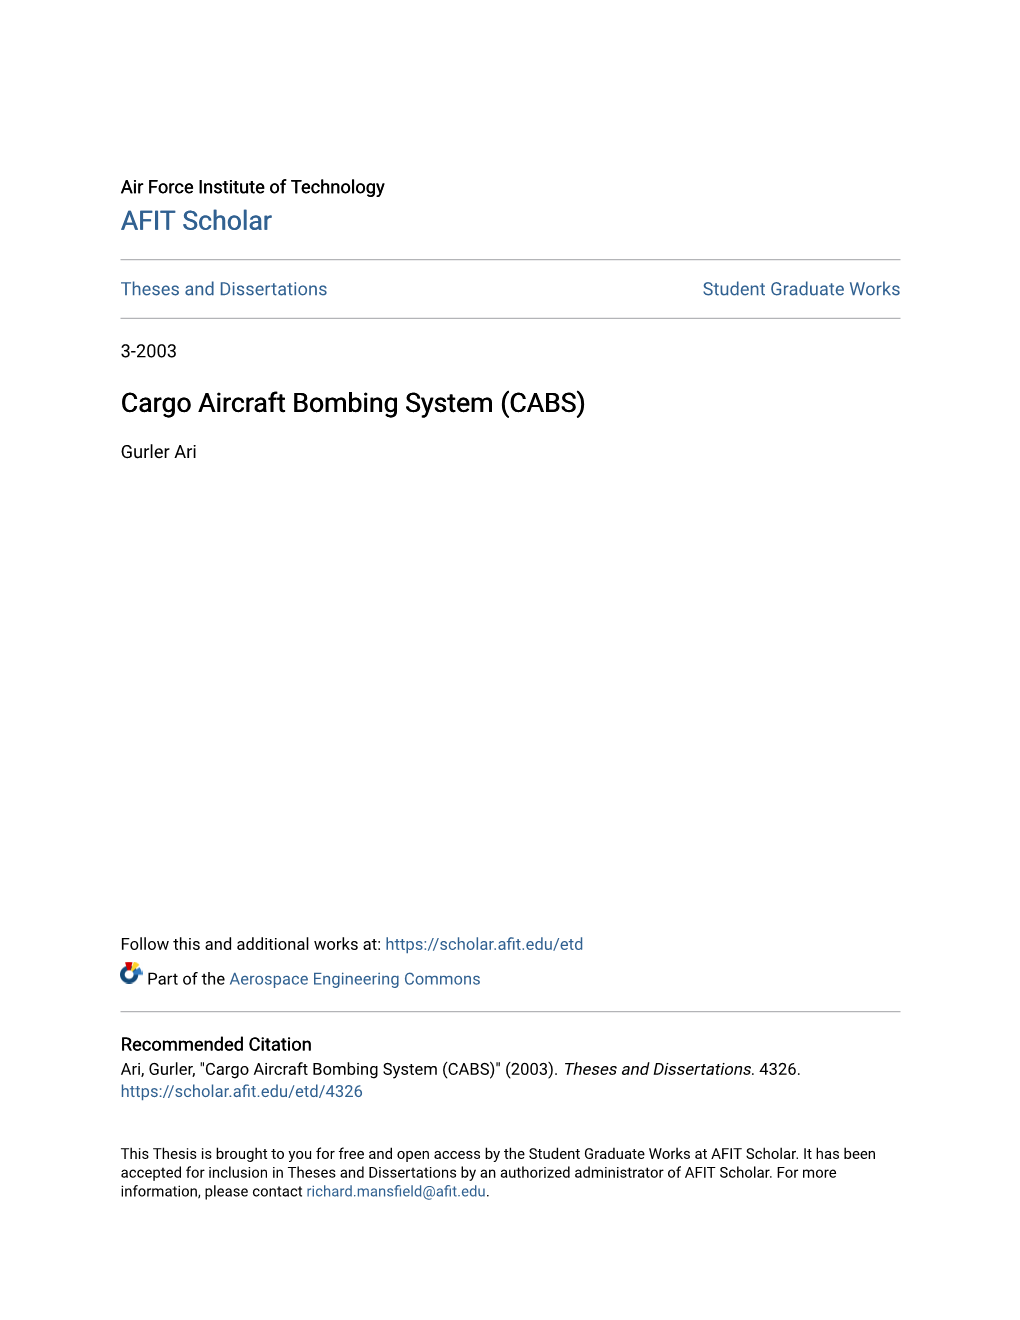 Cargo Aircraft Bombing System (CABS)